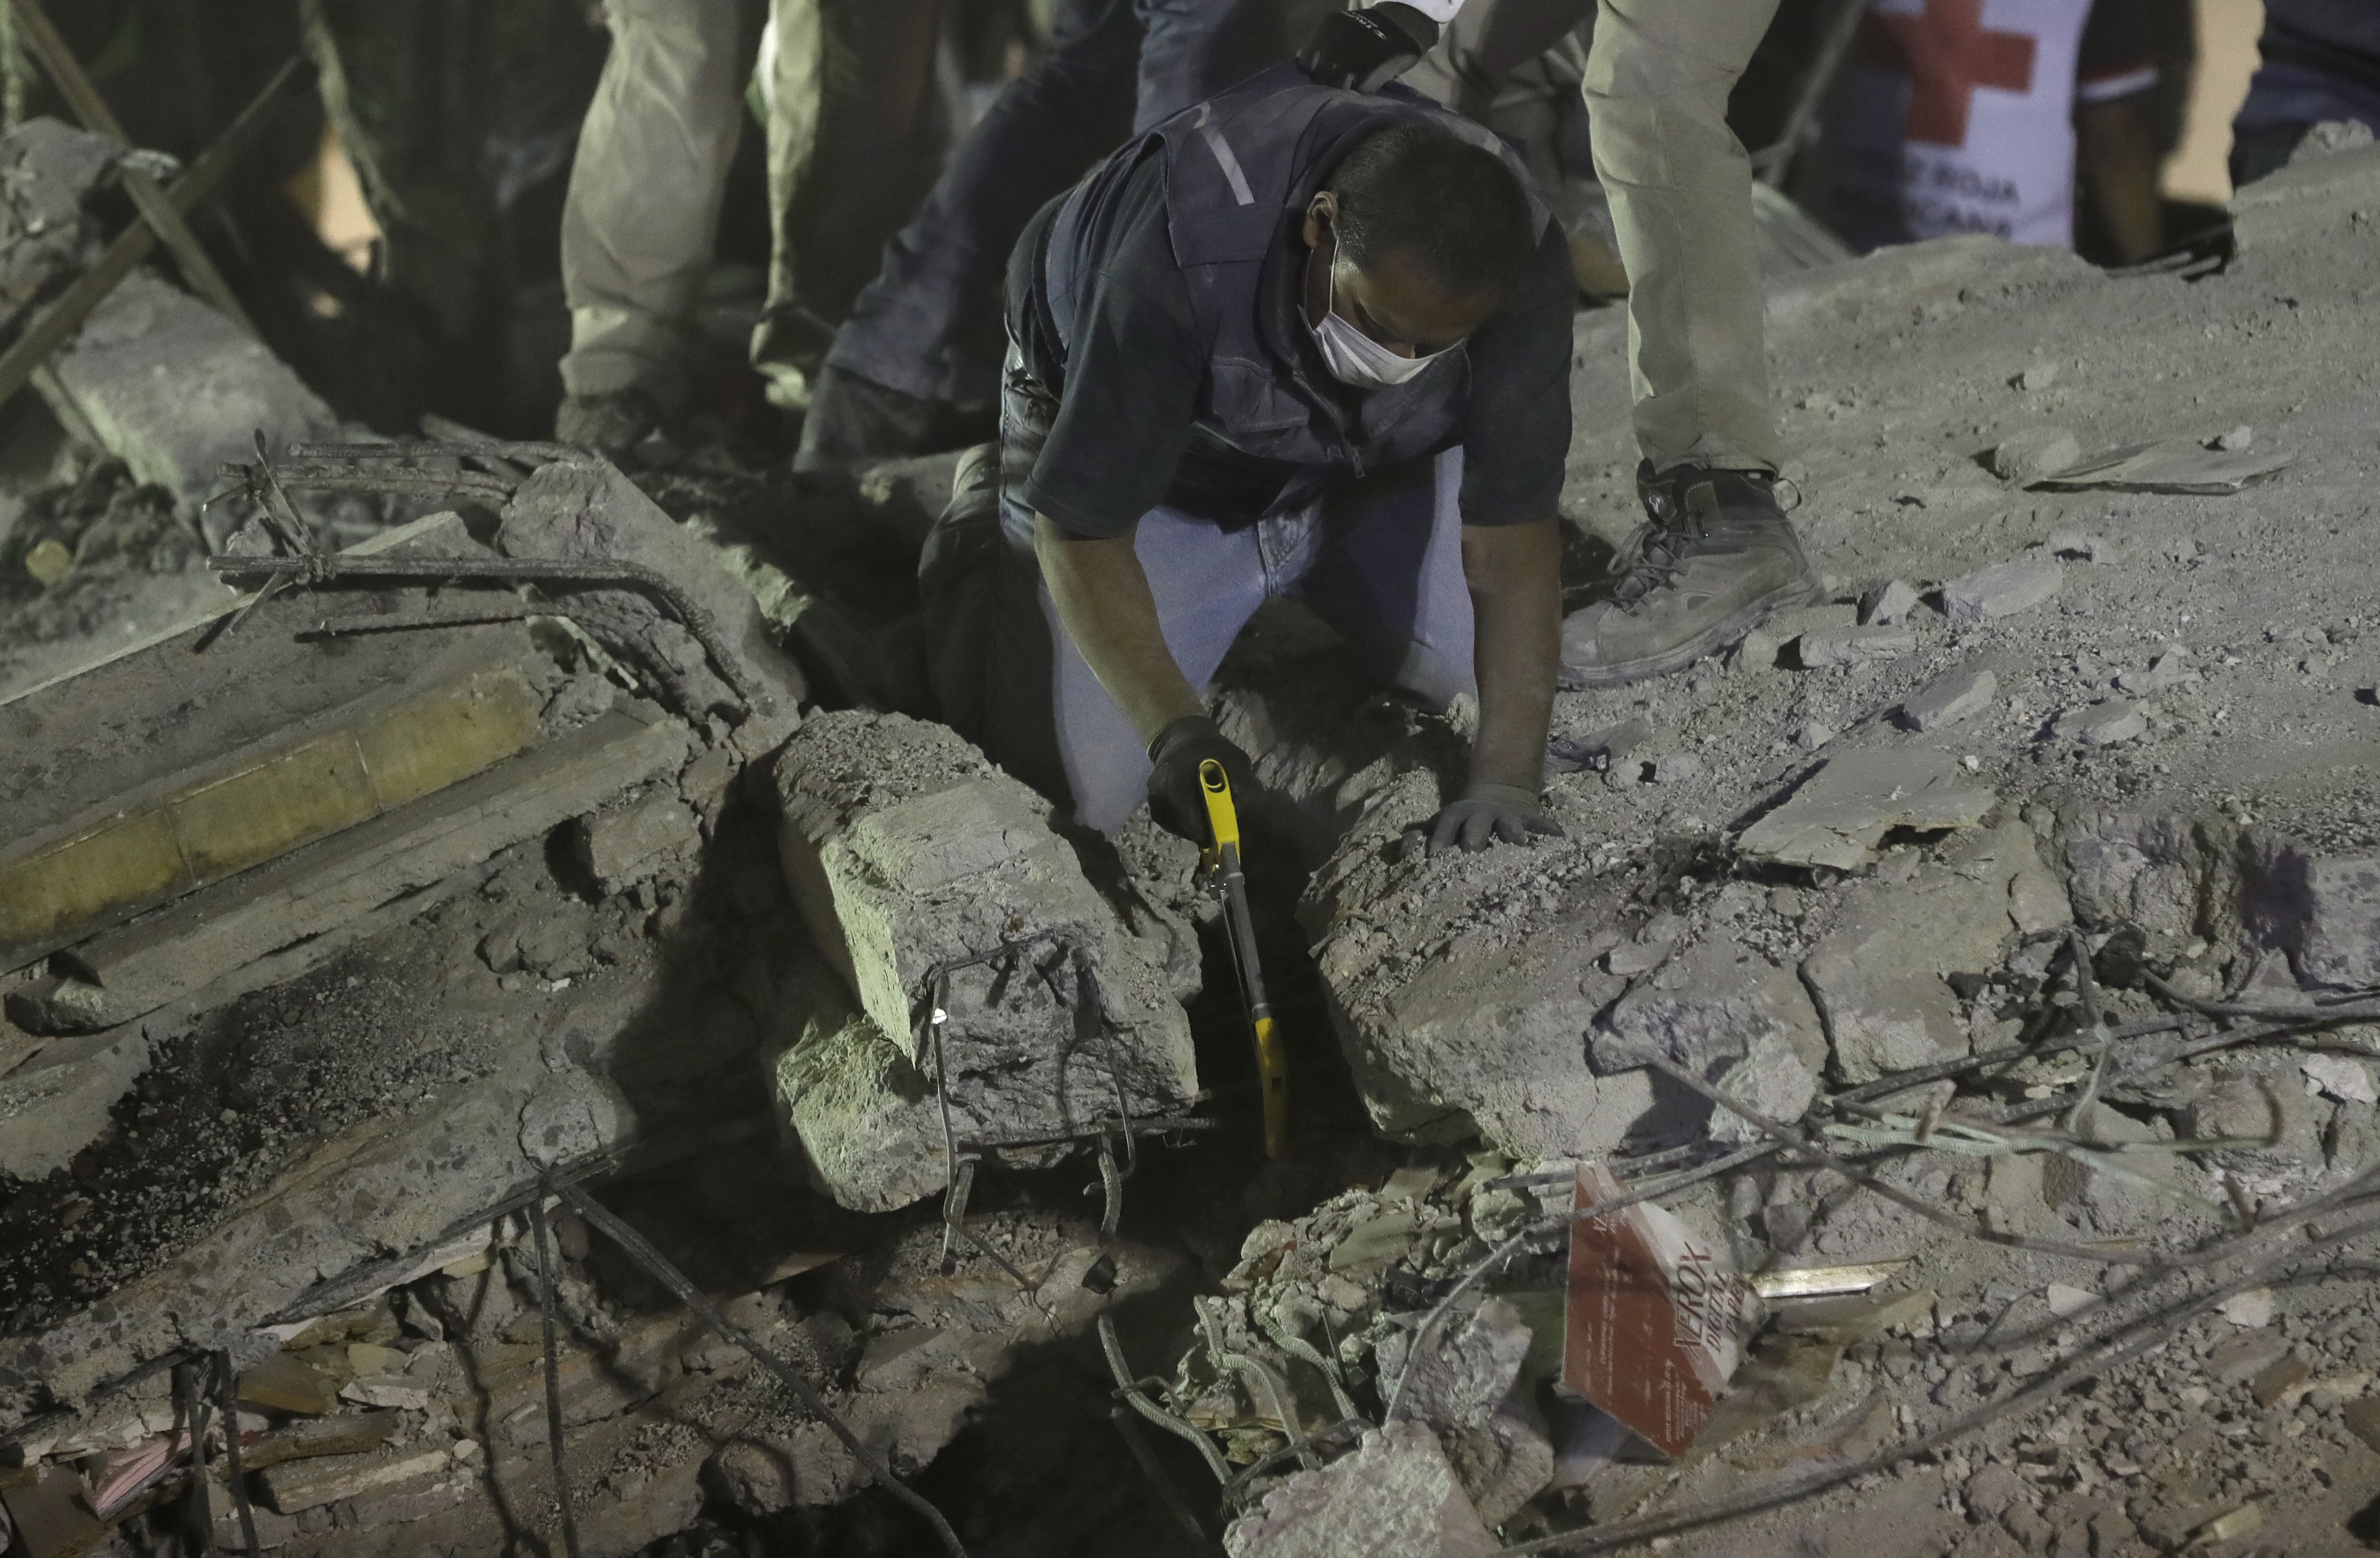 Rescue workers search for people trapped in a collapsed building in the Piedad Narvarte neighborhood of Mexico City, Tuesday, Sept. 19, 2017. A magnitude 7.1 earthquake has stunned central Mexico, killing more than 100 people as buildings collapsed in plumes of dust. Thousands fled into the streets in panic, and many stayed to help rescue those trapped. (AP Photo/Rebecca Blackwell)